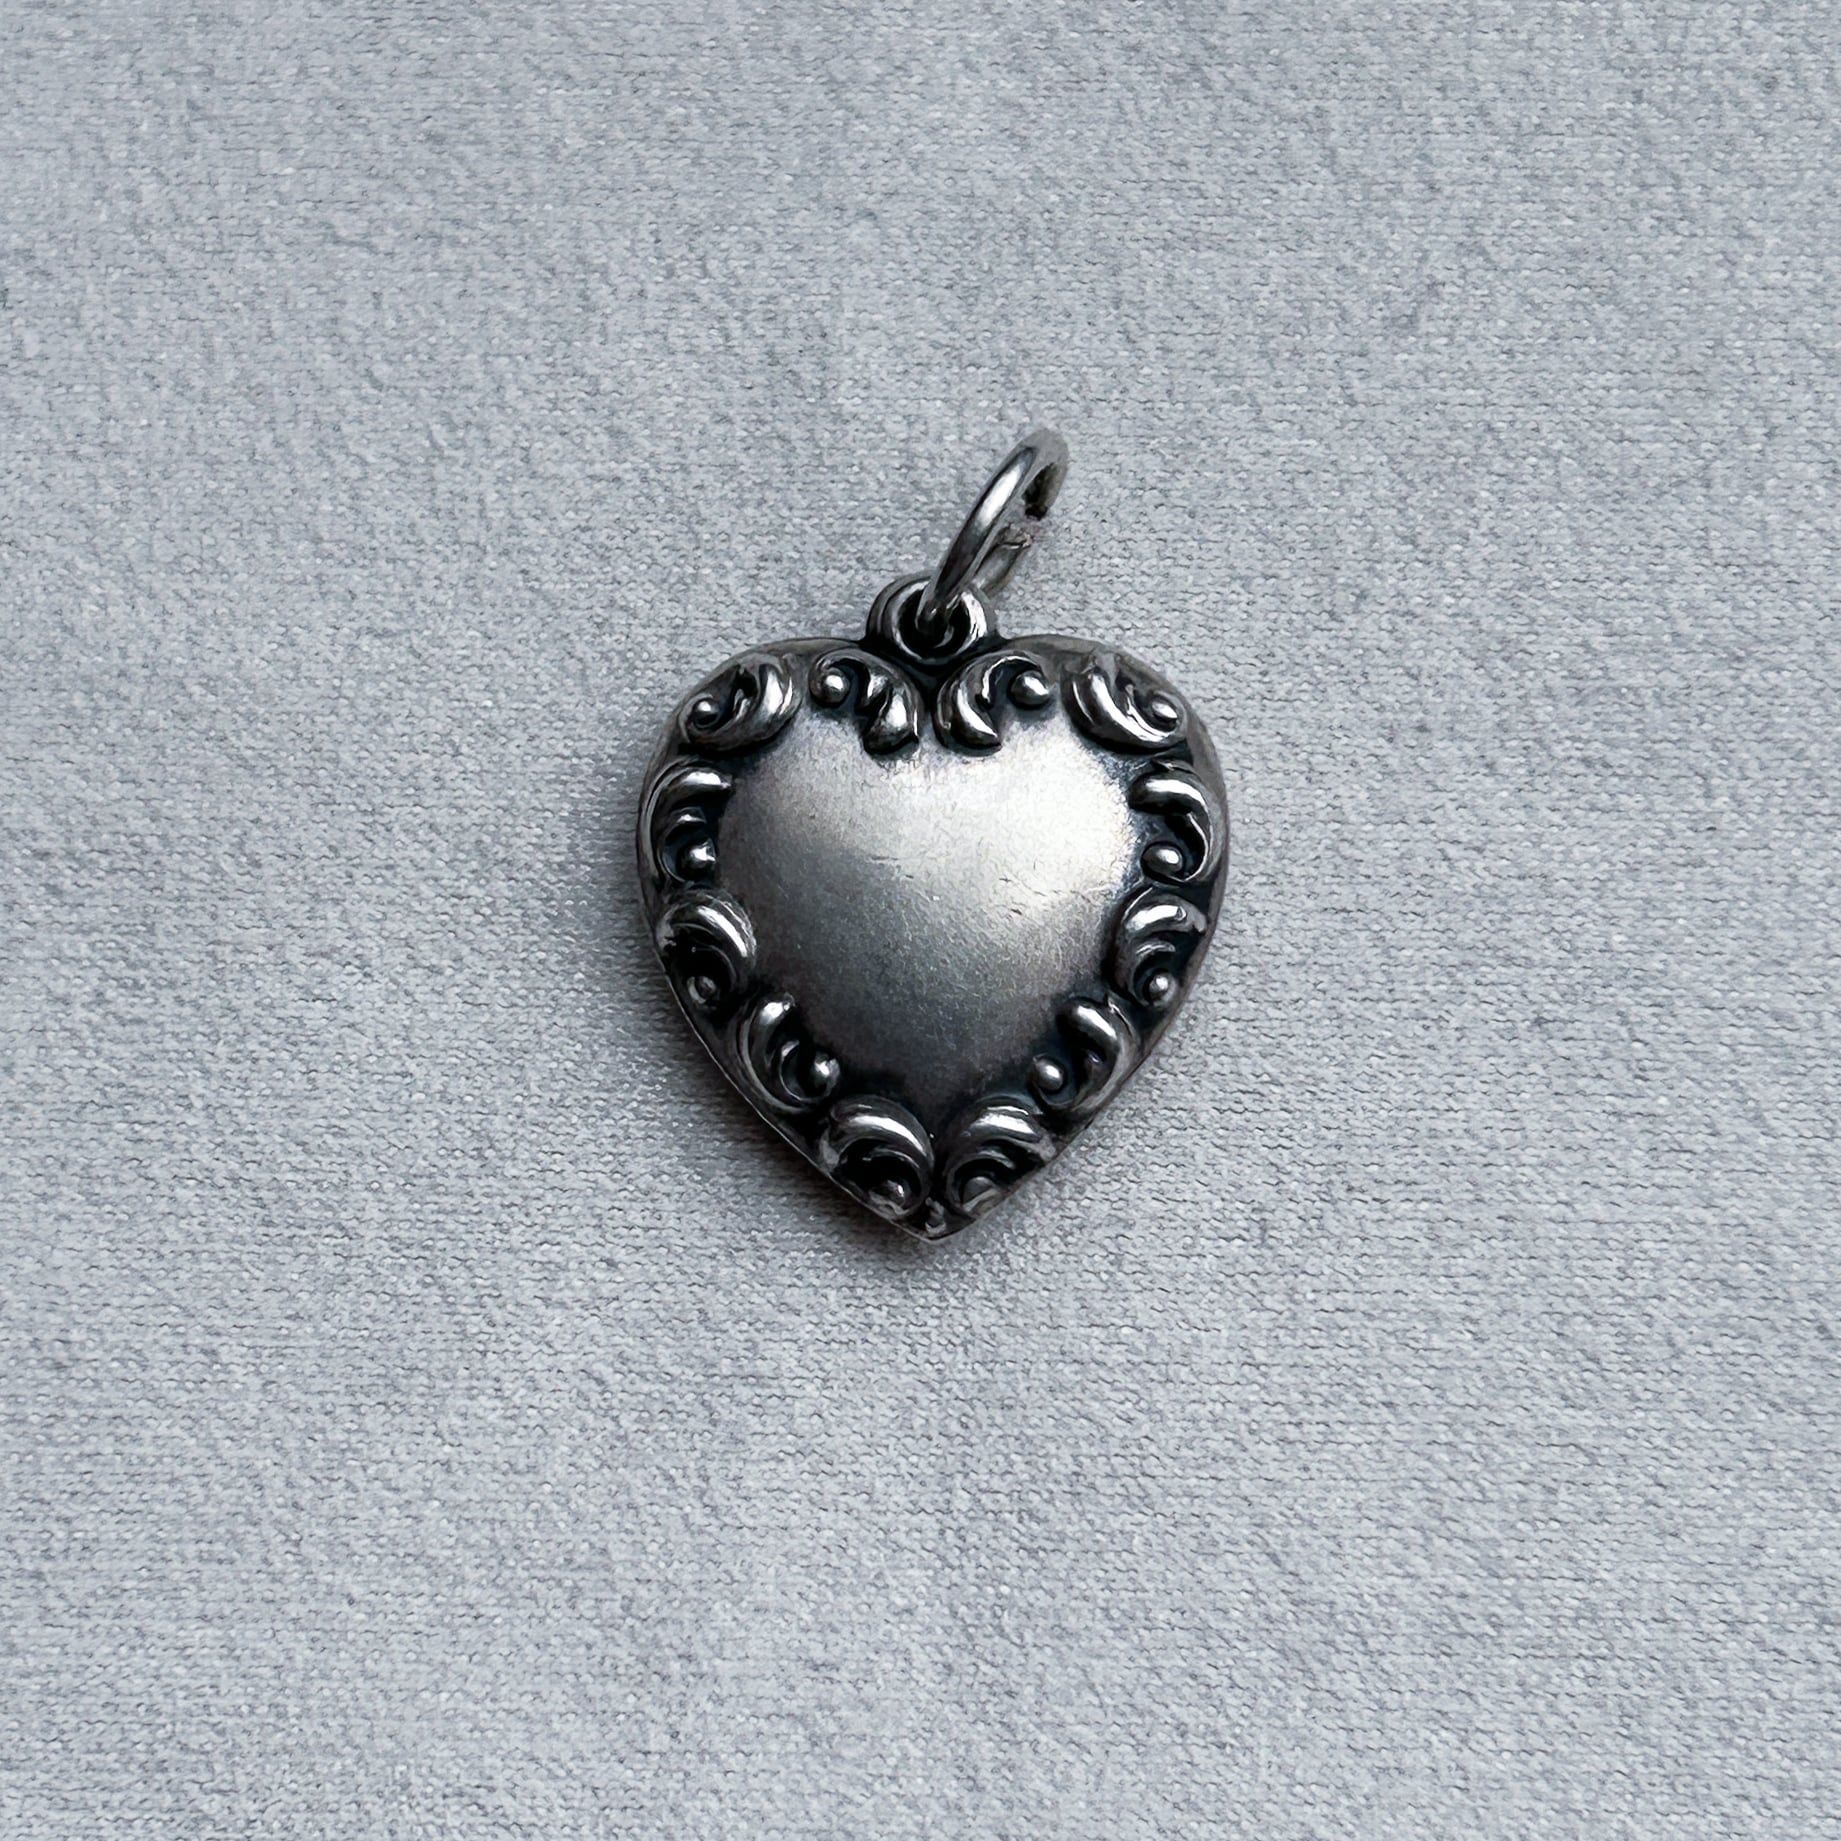 40s Sweet Heart jewelry Puffy Heart Sterling WWⅡ Forget me not 第二次世界大戦  スウィートハートジュエリー パフィーハート ヴィンテージ 勿忘草 ネックレス